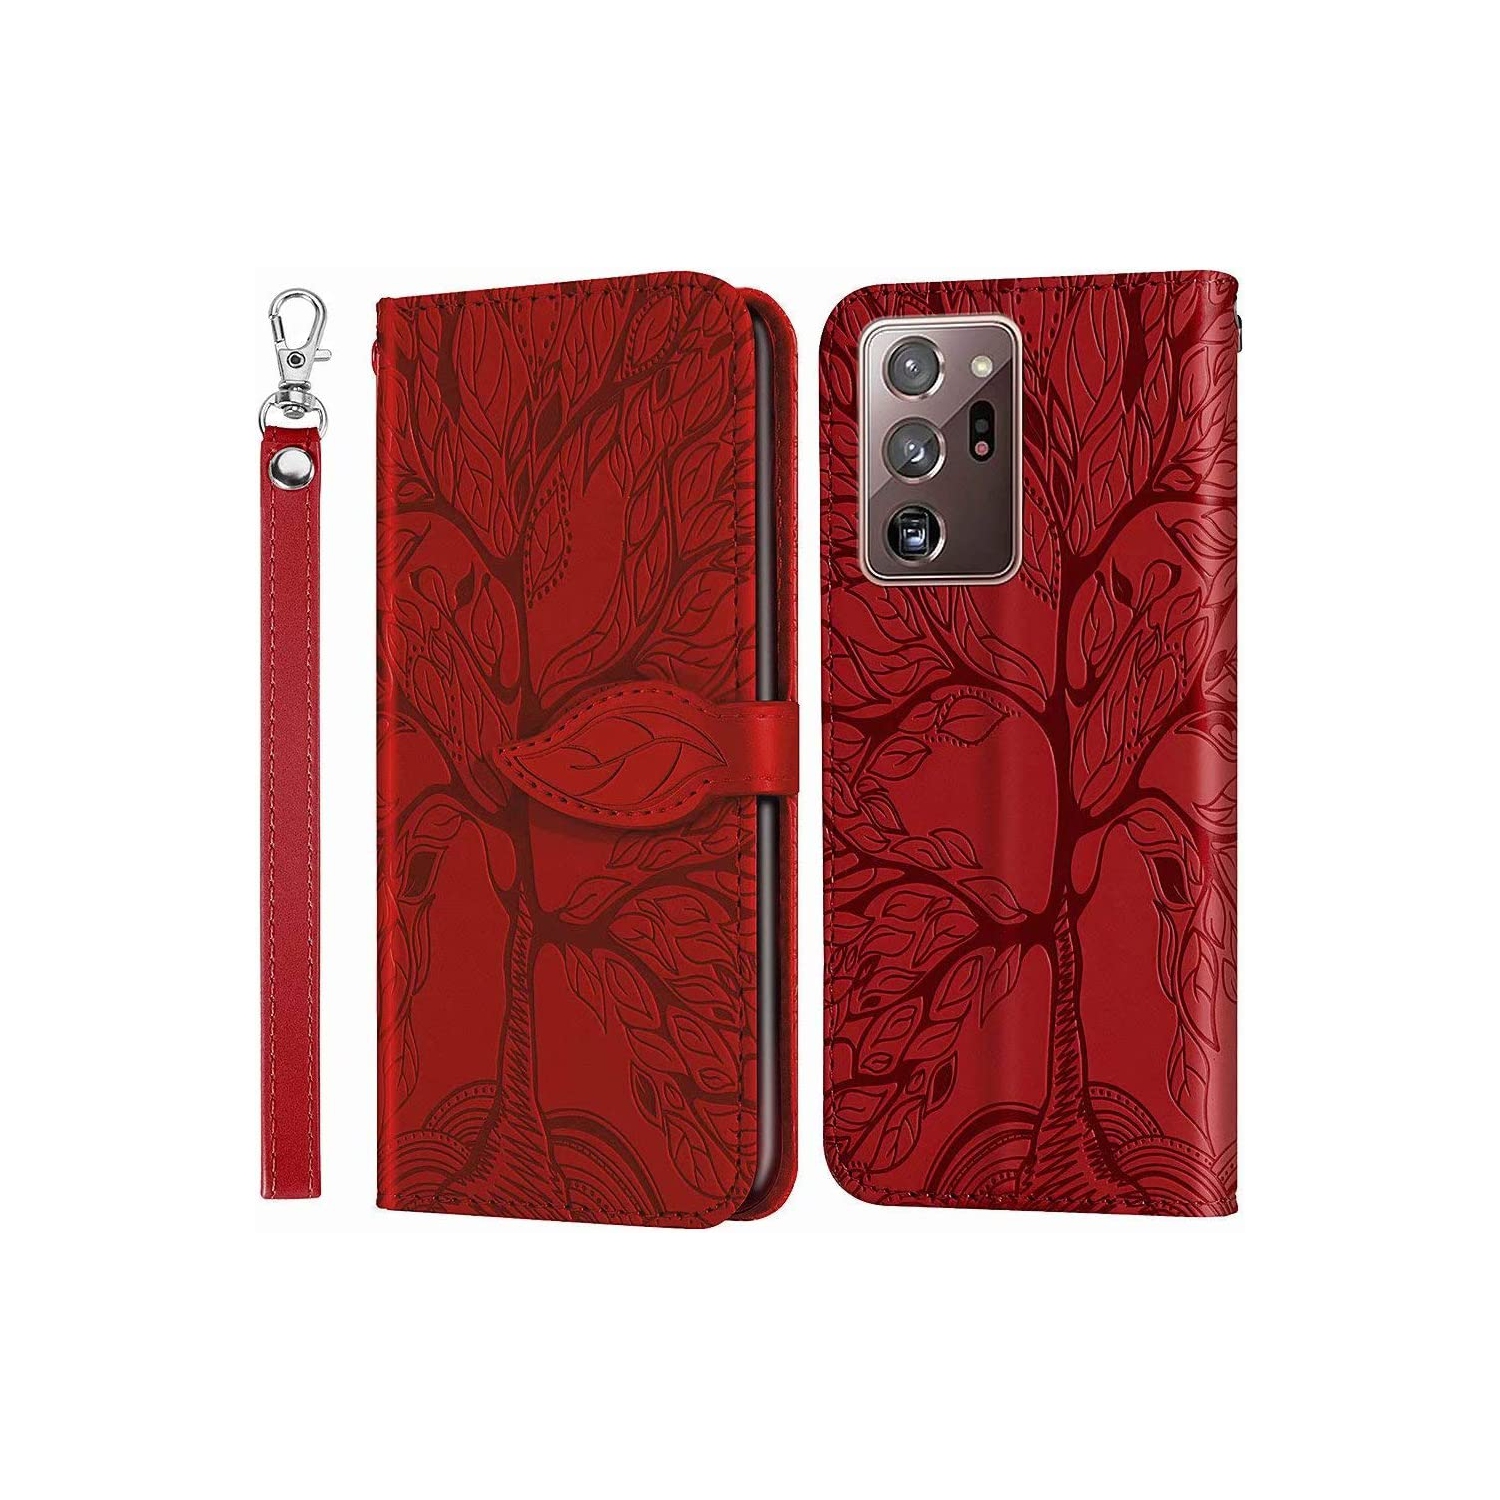 Premium PU Leather Embossed Tree Wallet Case with card slots and wrist strap for Samsung Galaxy Note 20 Ultra SM-N986